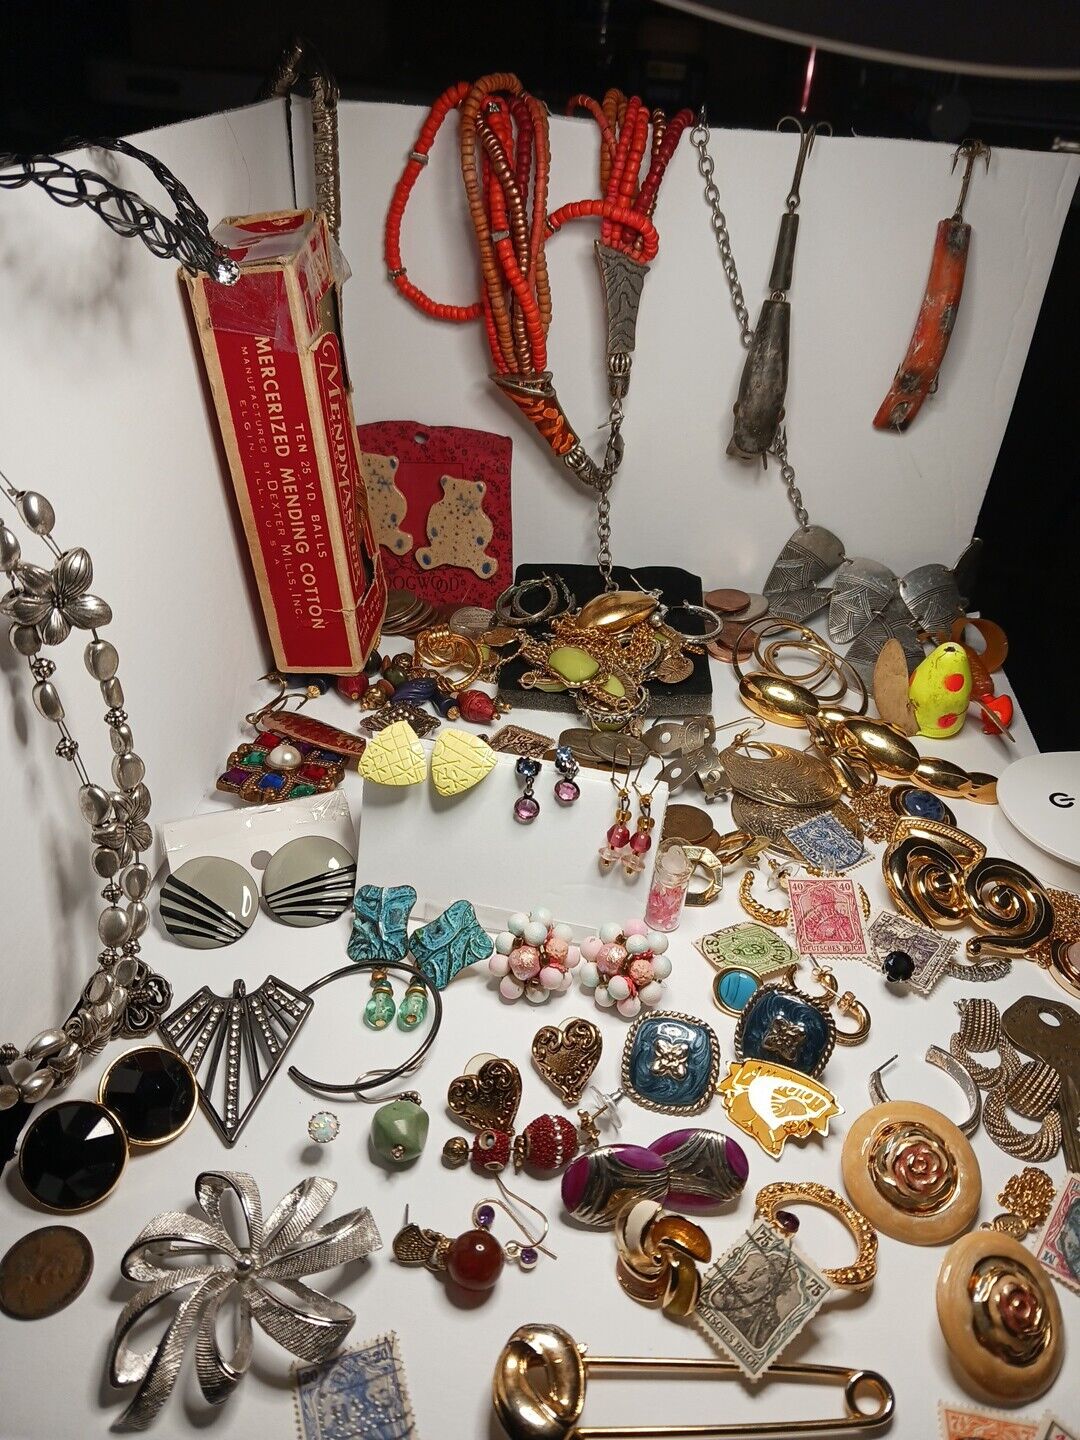 Huge Couples Lot Coins Stamps Lures Jewelry Pins Ads Banjo Gemstones 925 Drawe